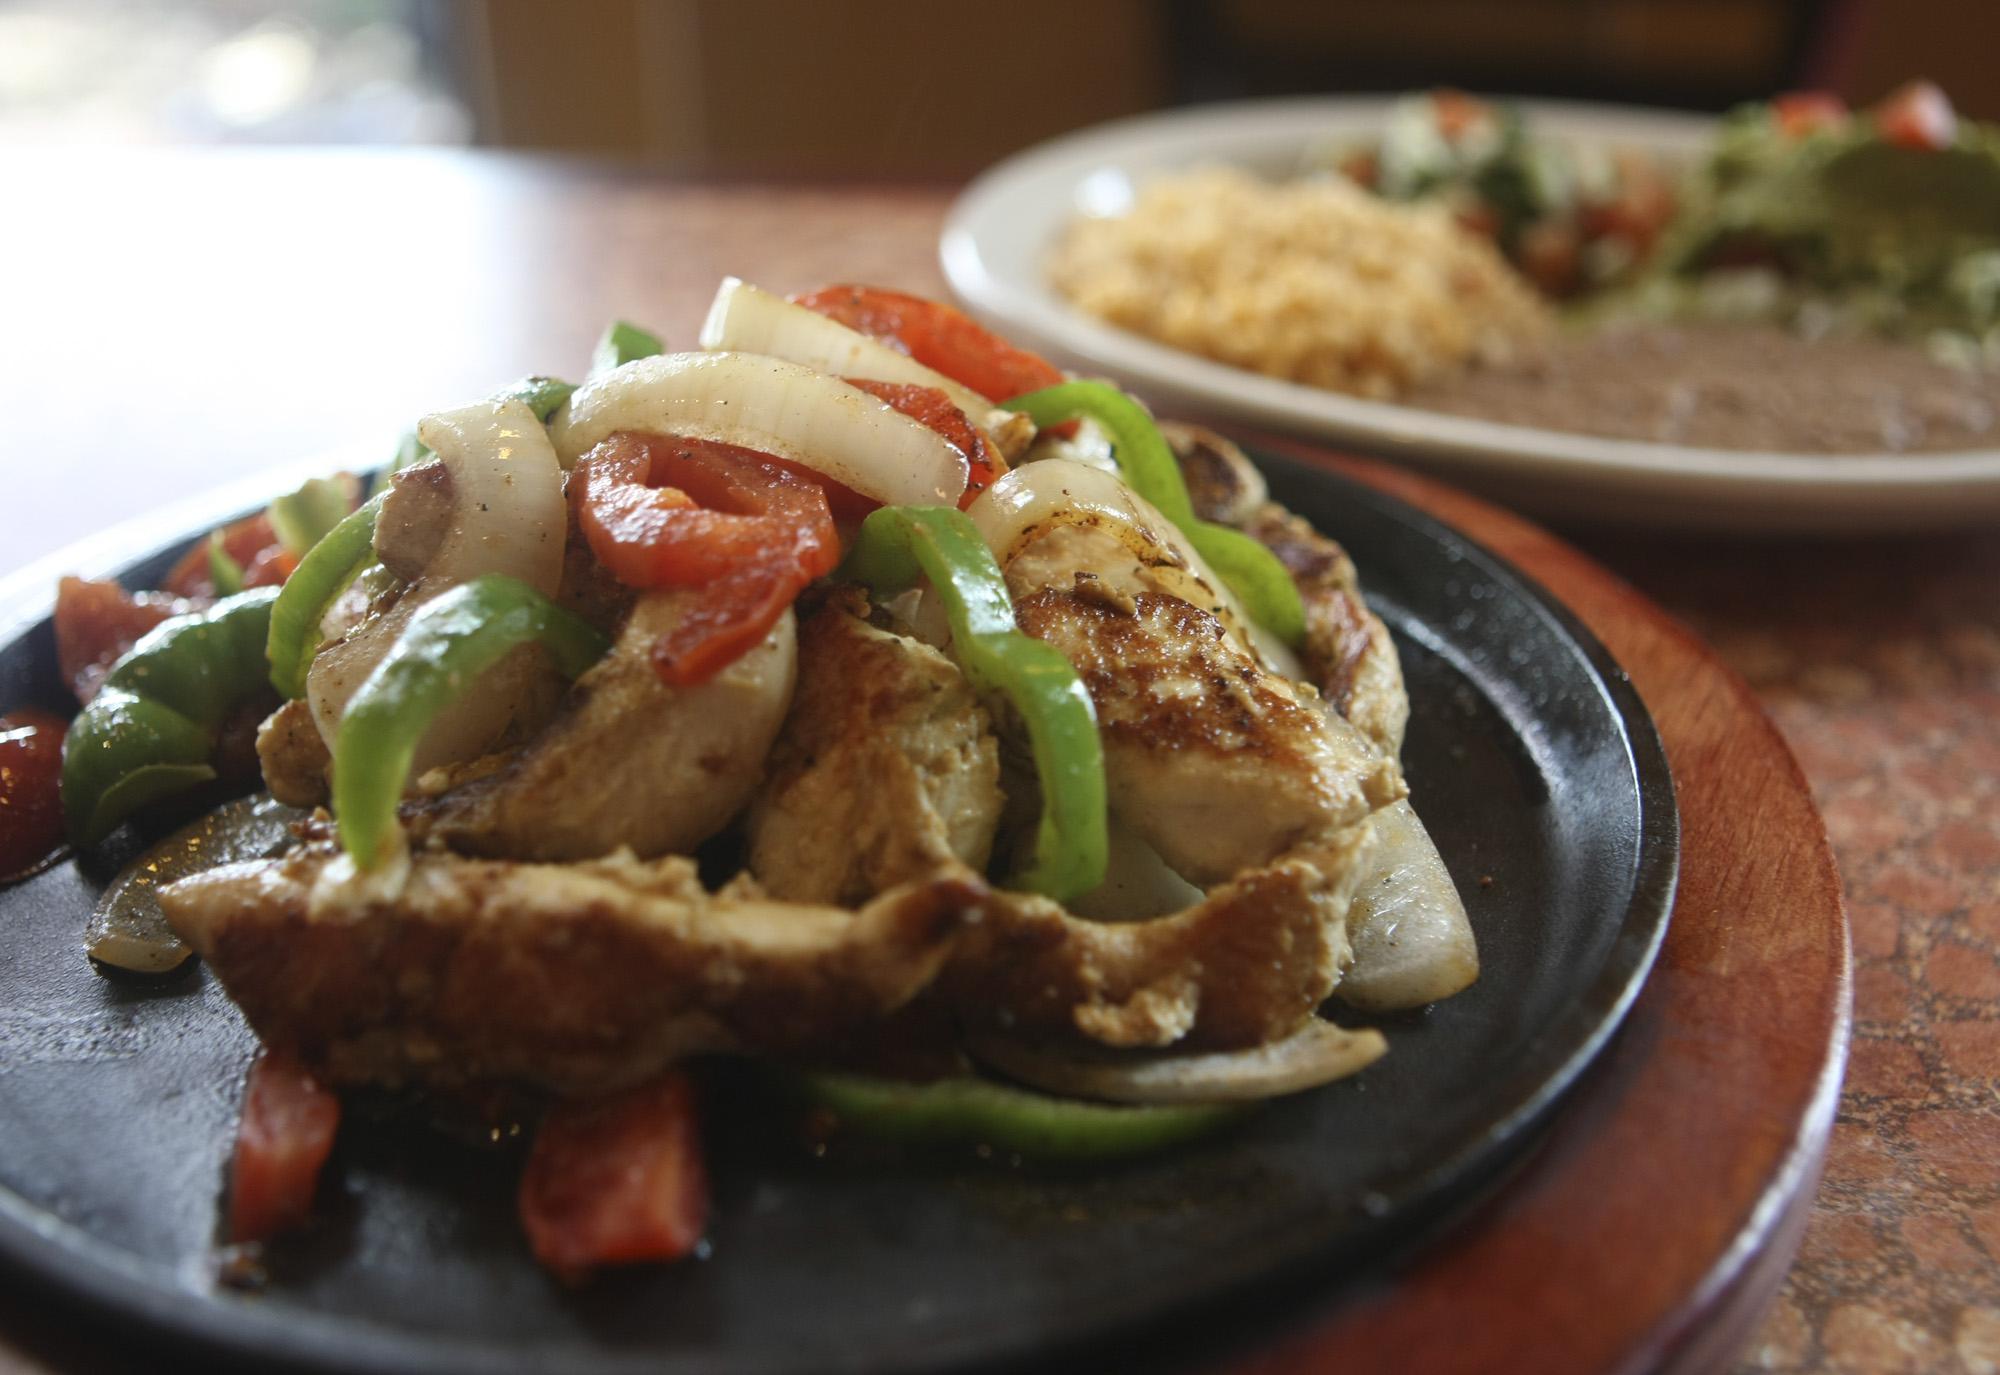 H-E-B adds San Antonio Mexican food restaurant meals from Los Barrios